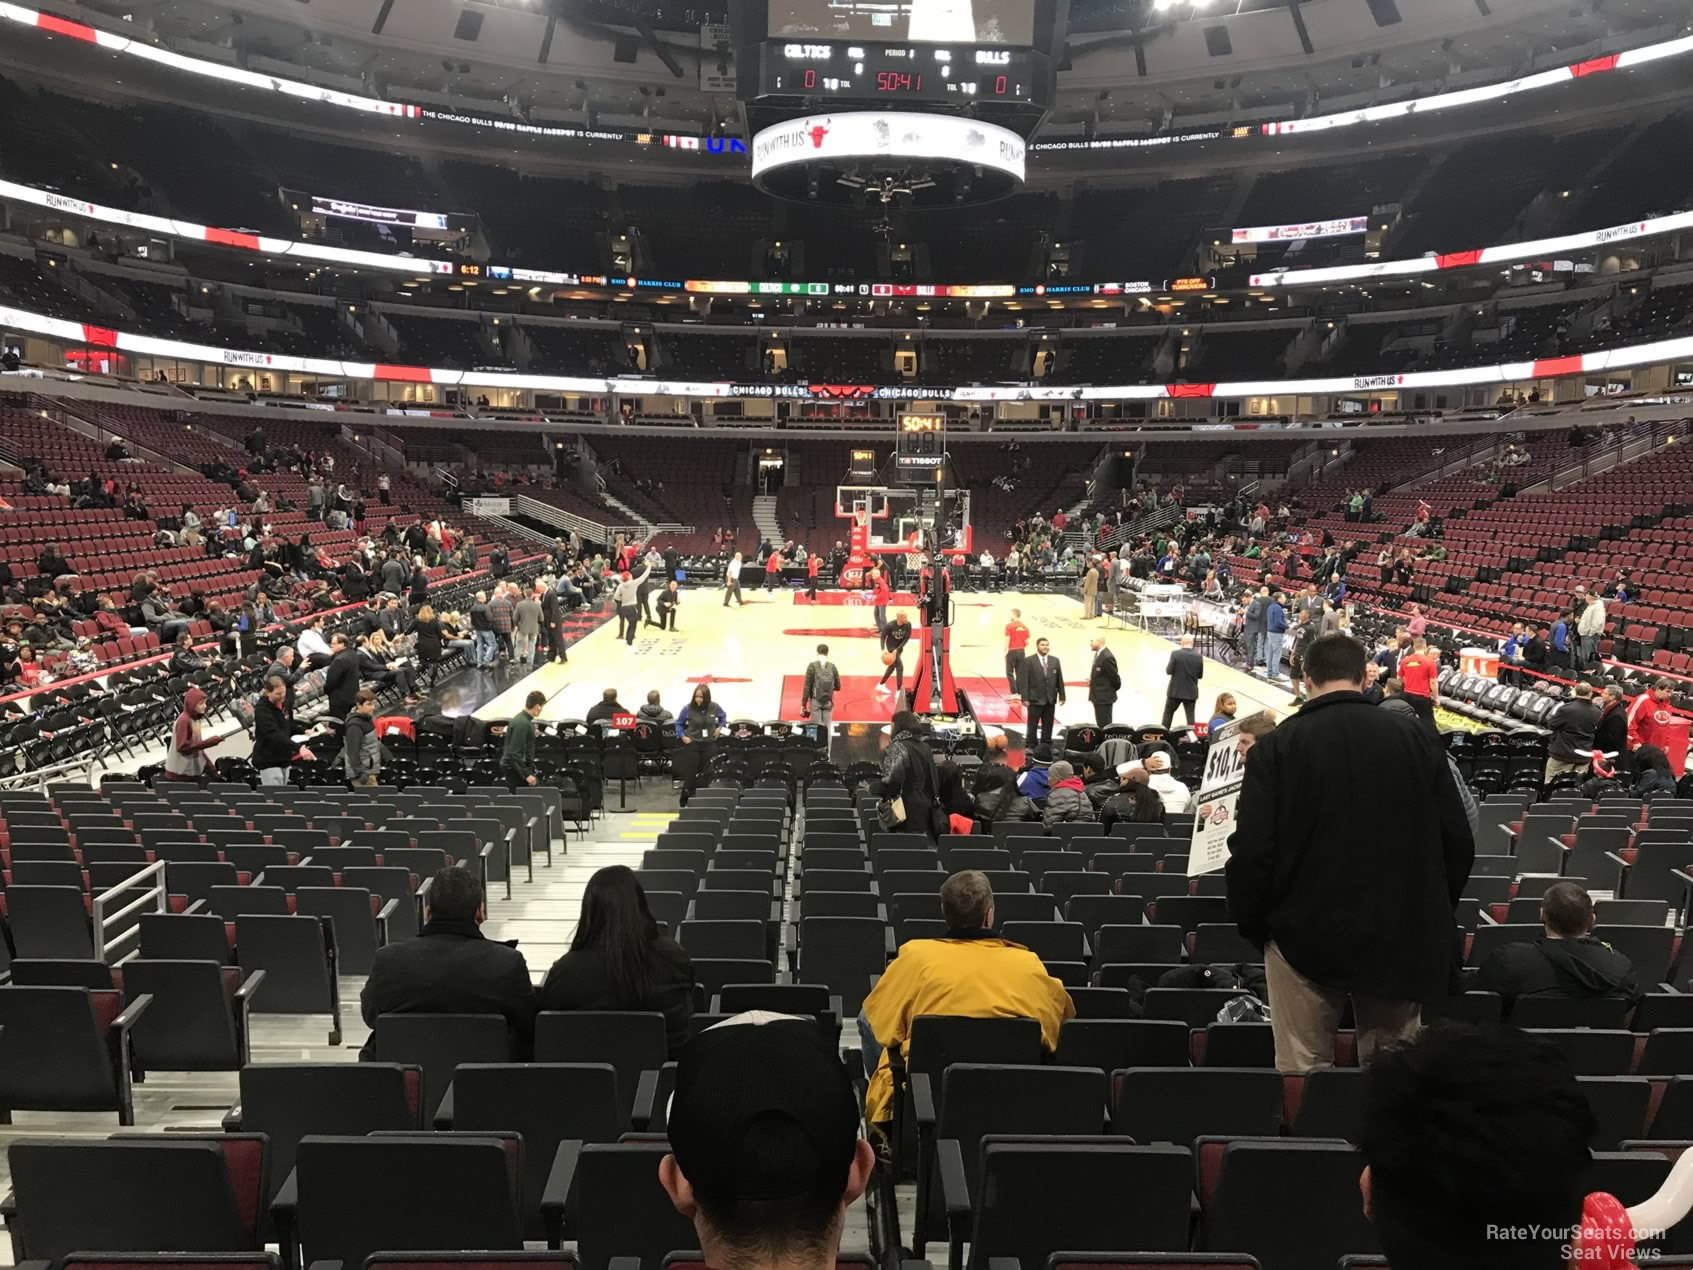 Section 106 at United Center - Chicago Bulls - RateYourSeats.com